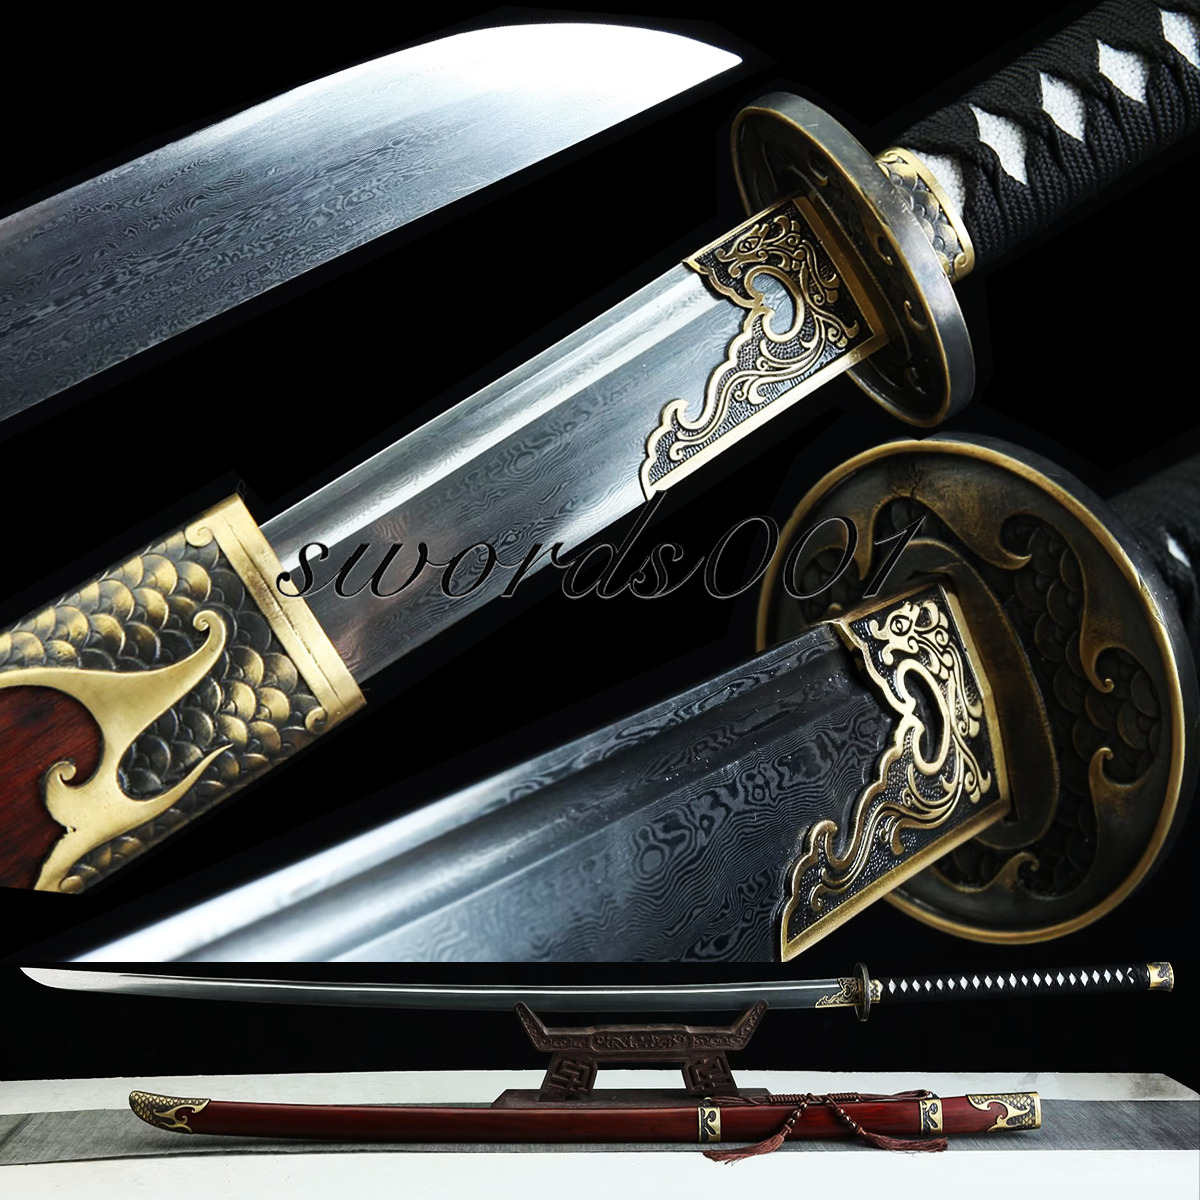 59\'\' Sharp Miao Dao Broadsword Chinese Saber Folded Steel Dragon Scale Fittings